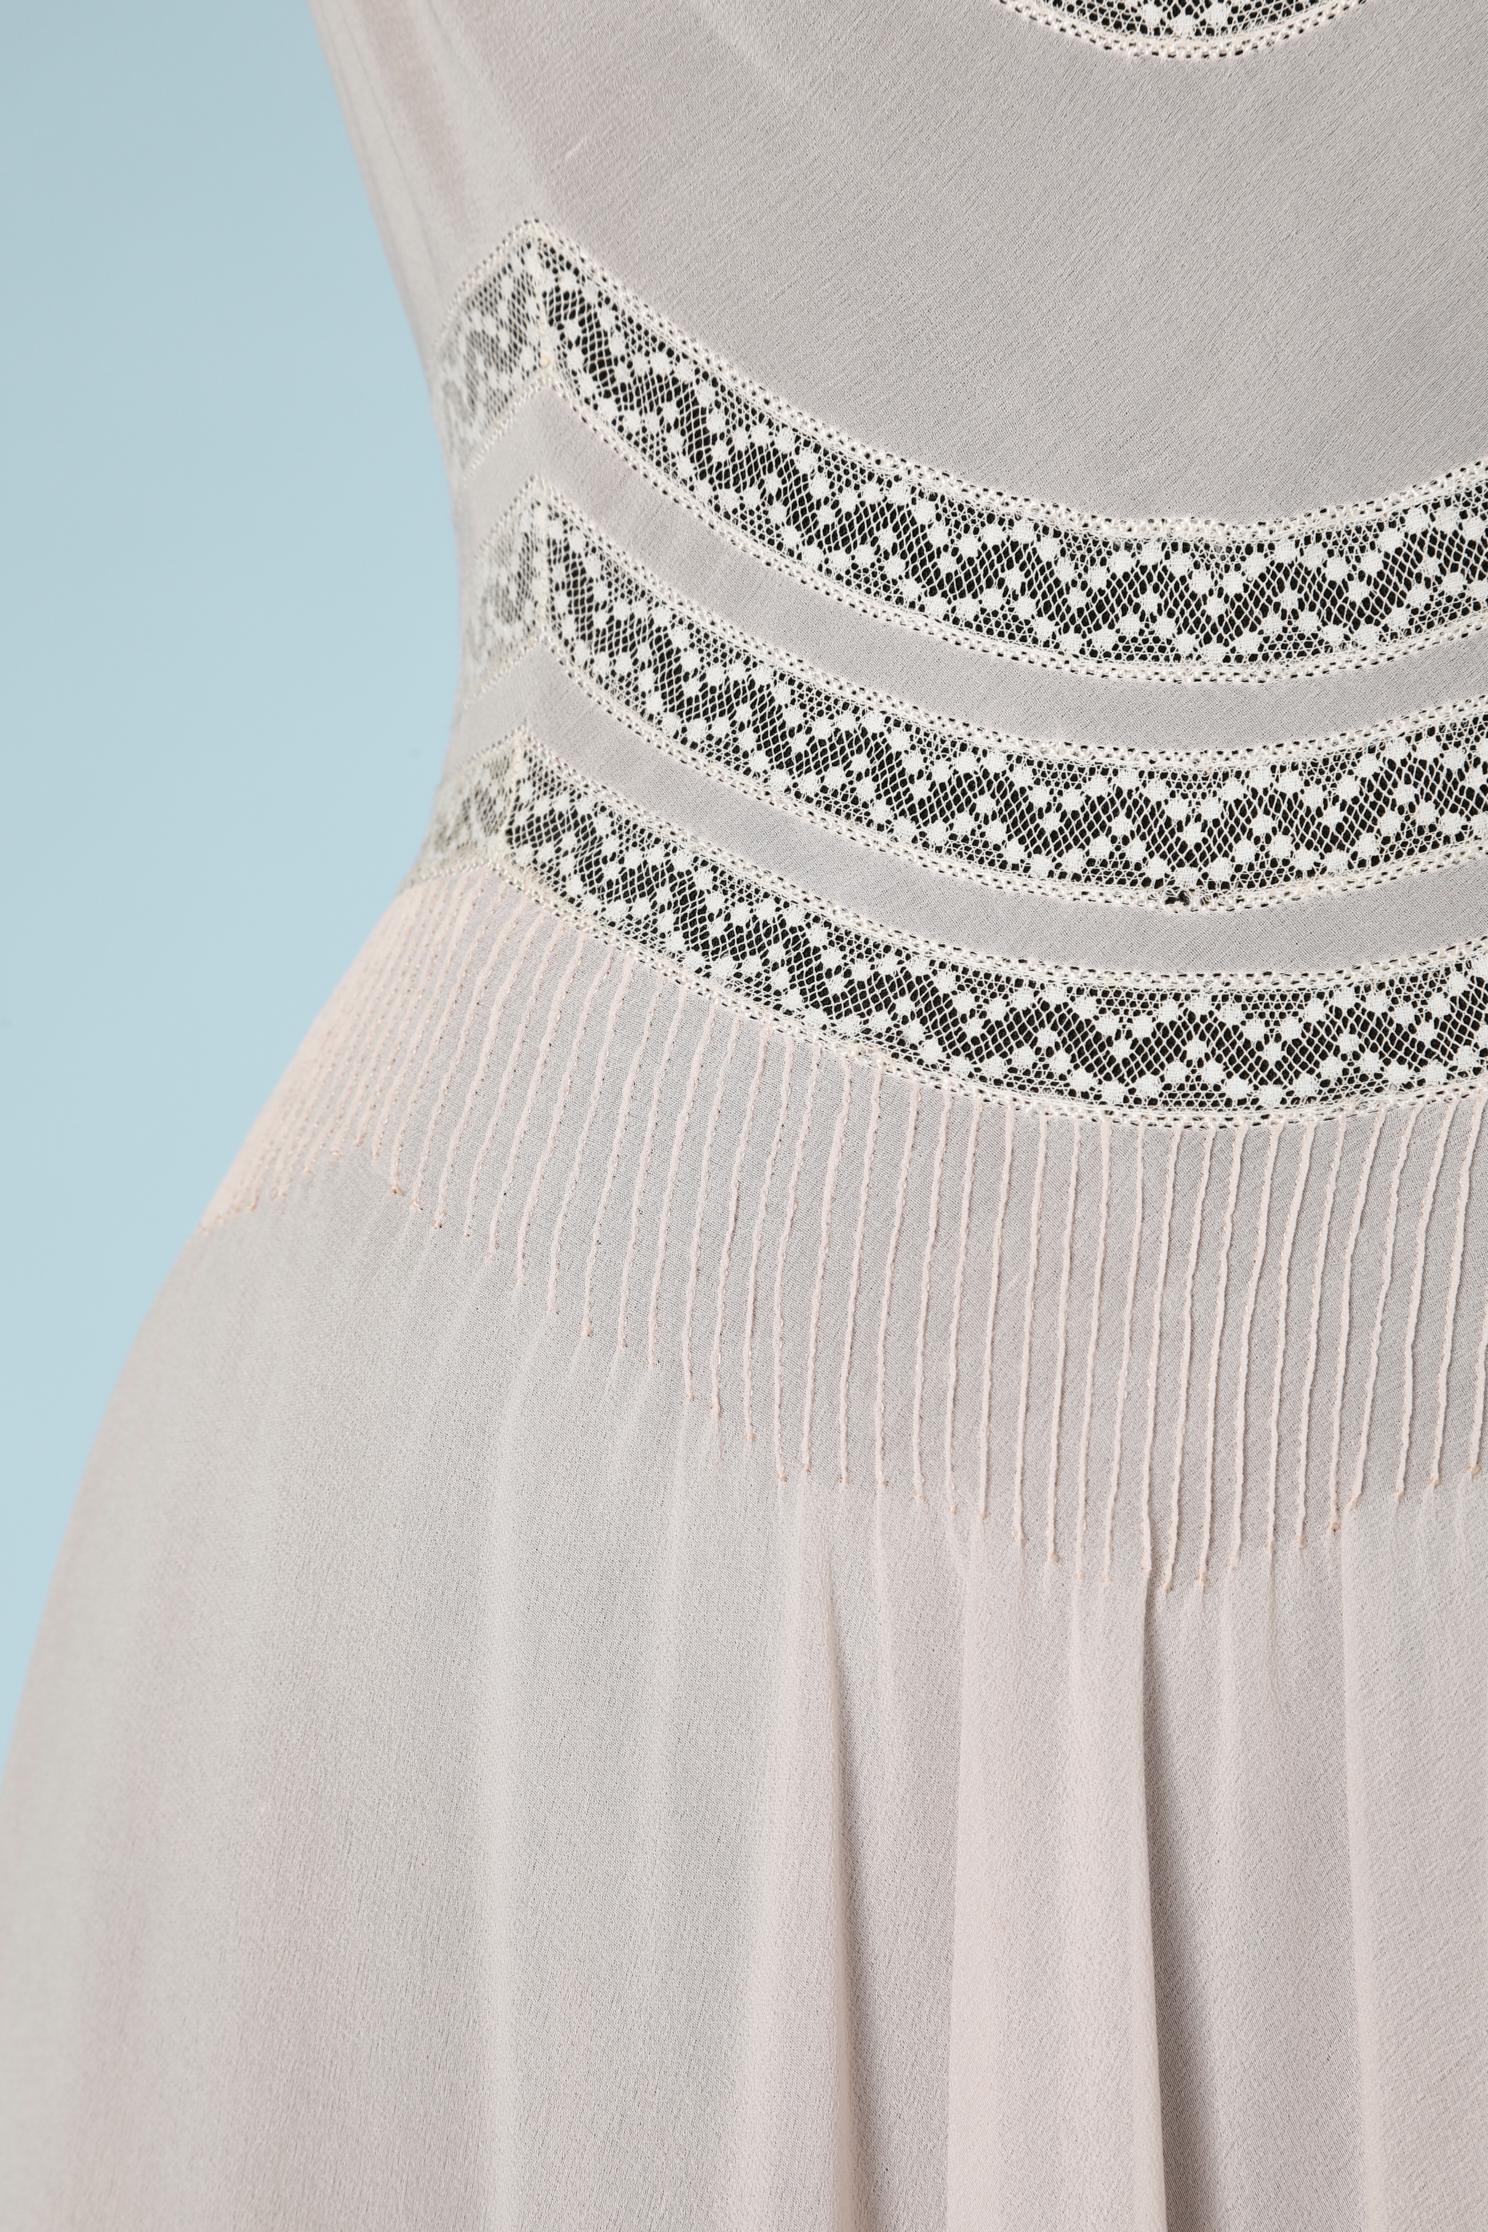 Gray 1930 nightgown in pale pink silk crepe, lace and topstitching 